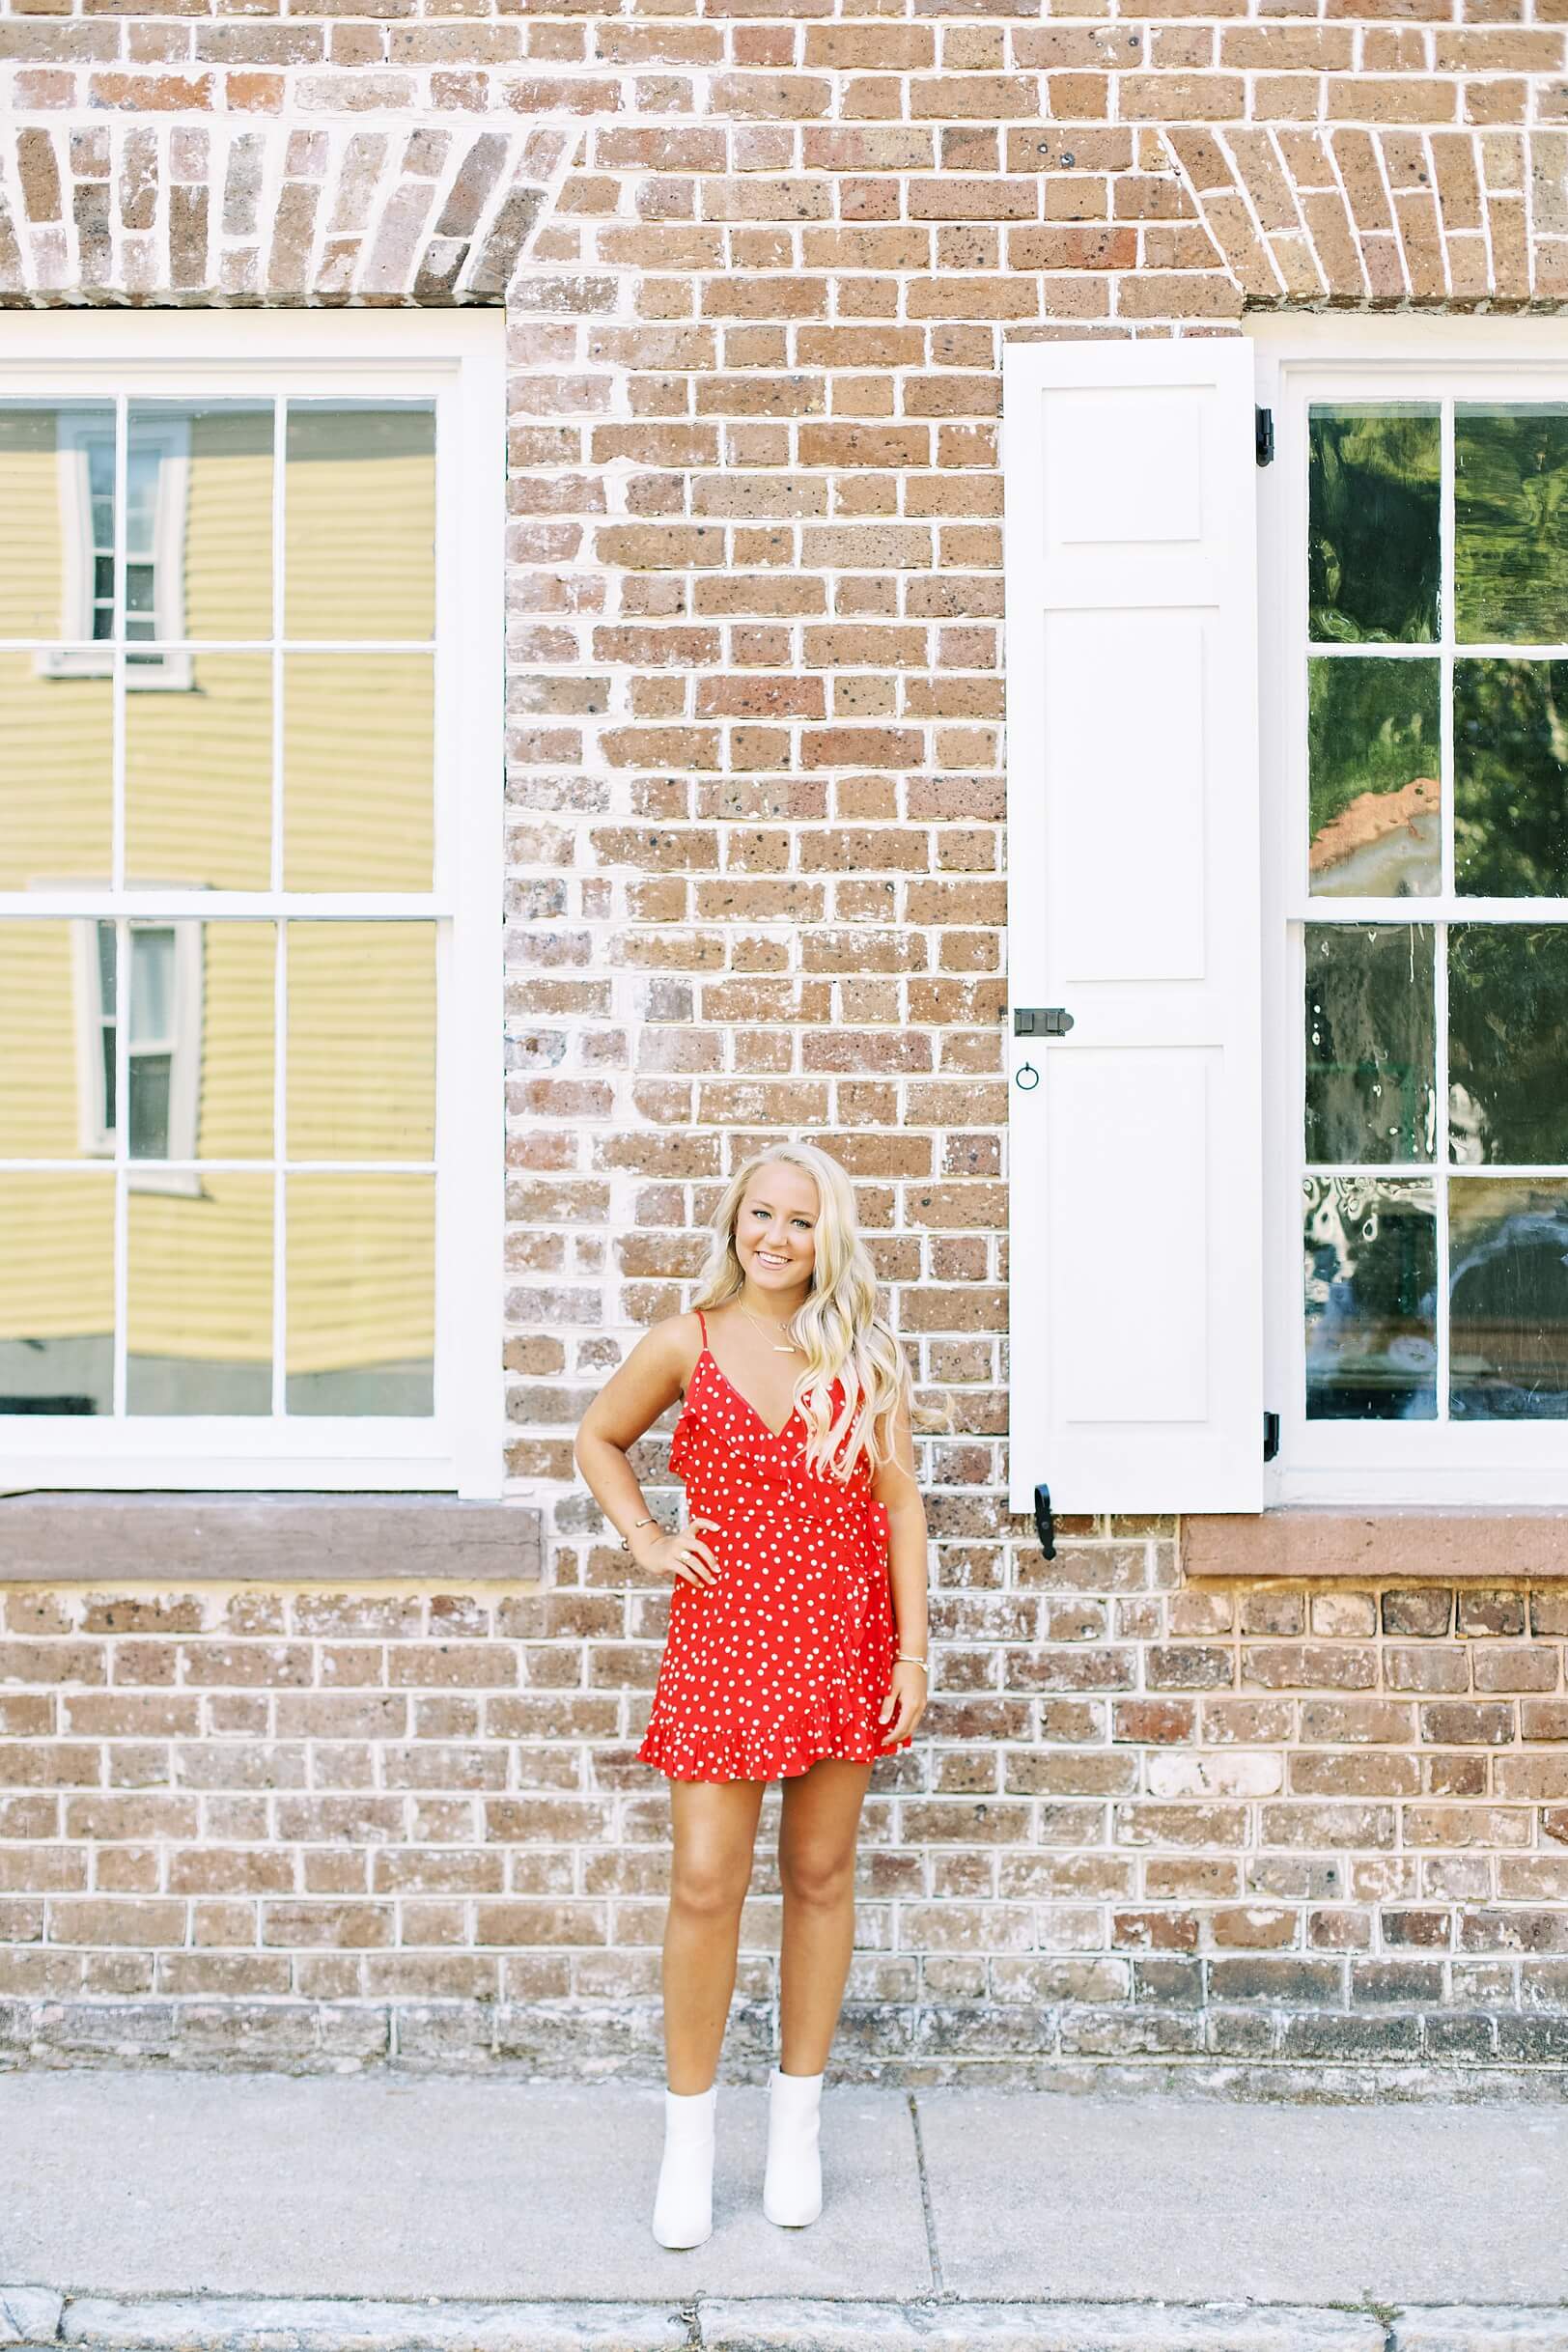 Charleston architecture, girl in red dress by brick wall | Kaitlin Scott Photography